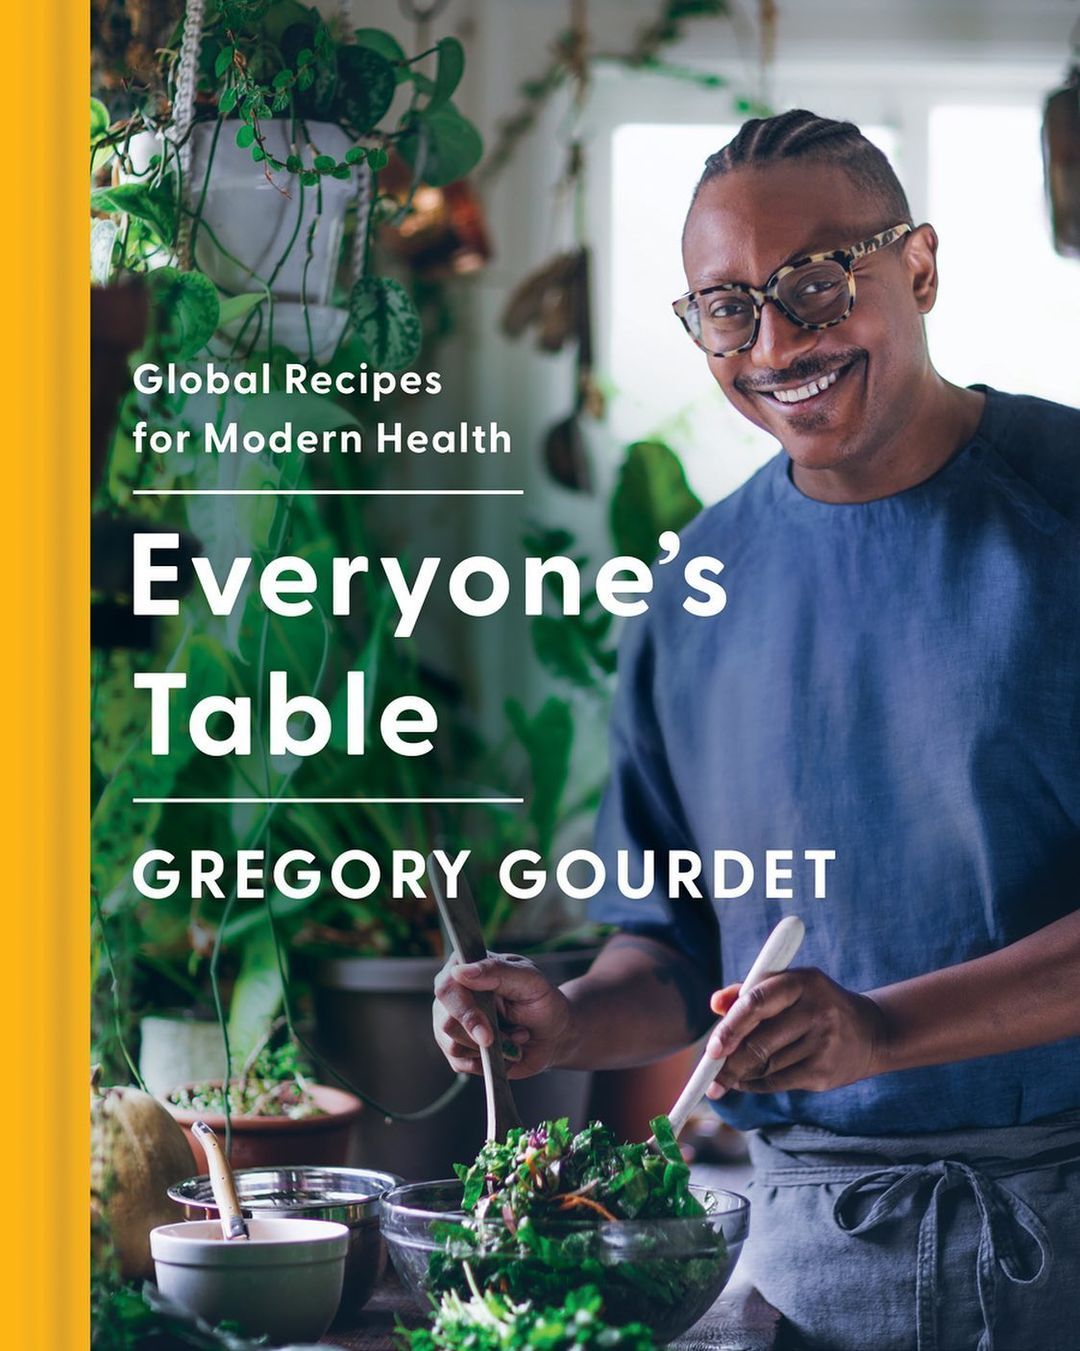 Everyone’s Table: Global Recipes for Modern Health by Gregory Gourdet